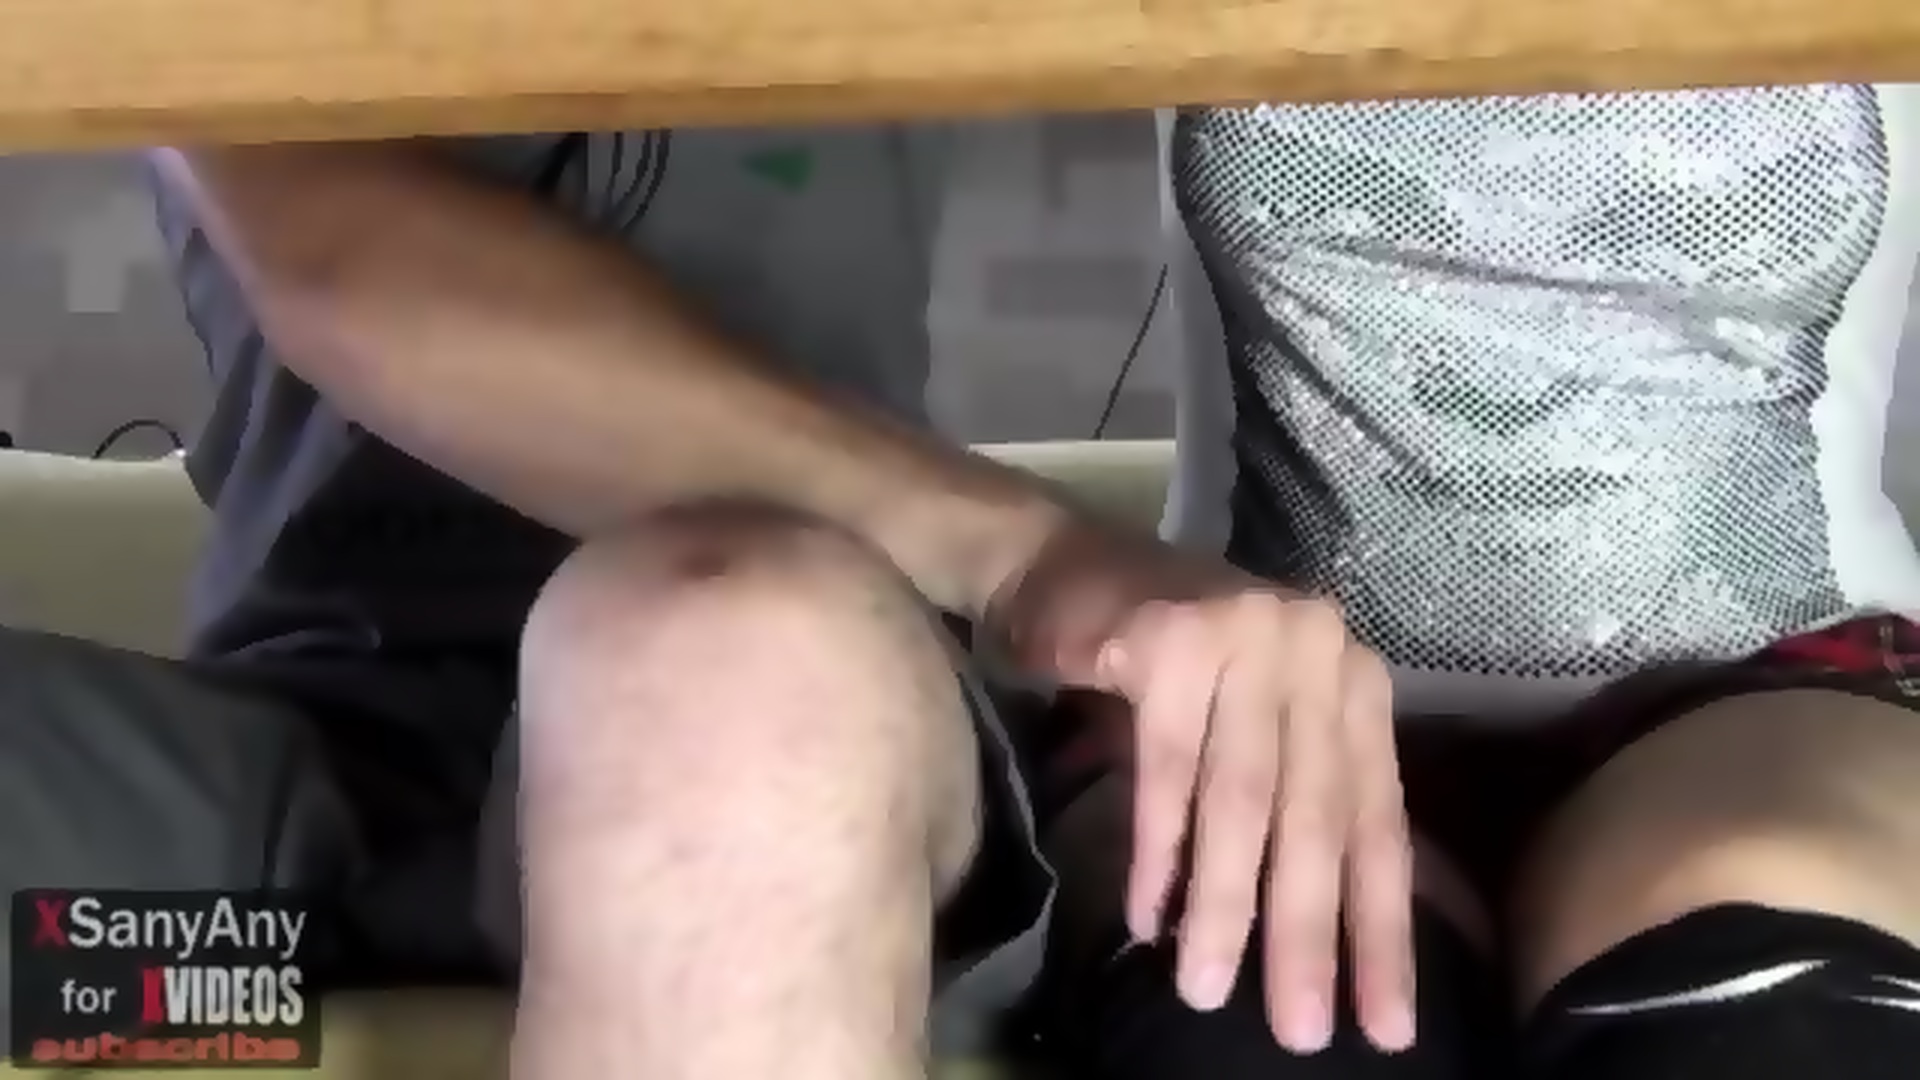 ¾ Schoolgirl Handjob Under The Table To A Classmate In A Chemistry